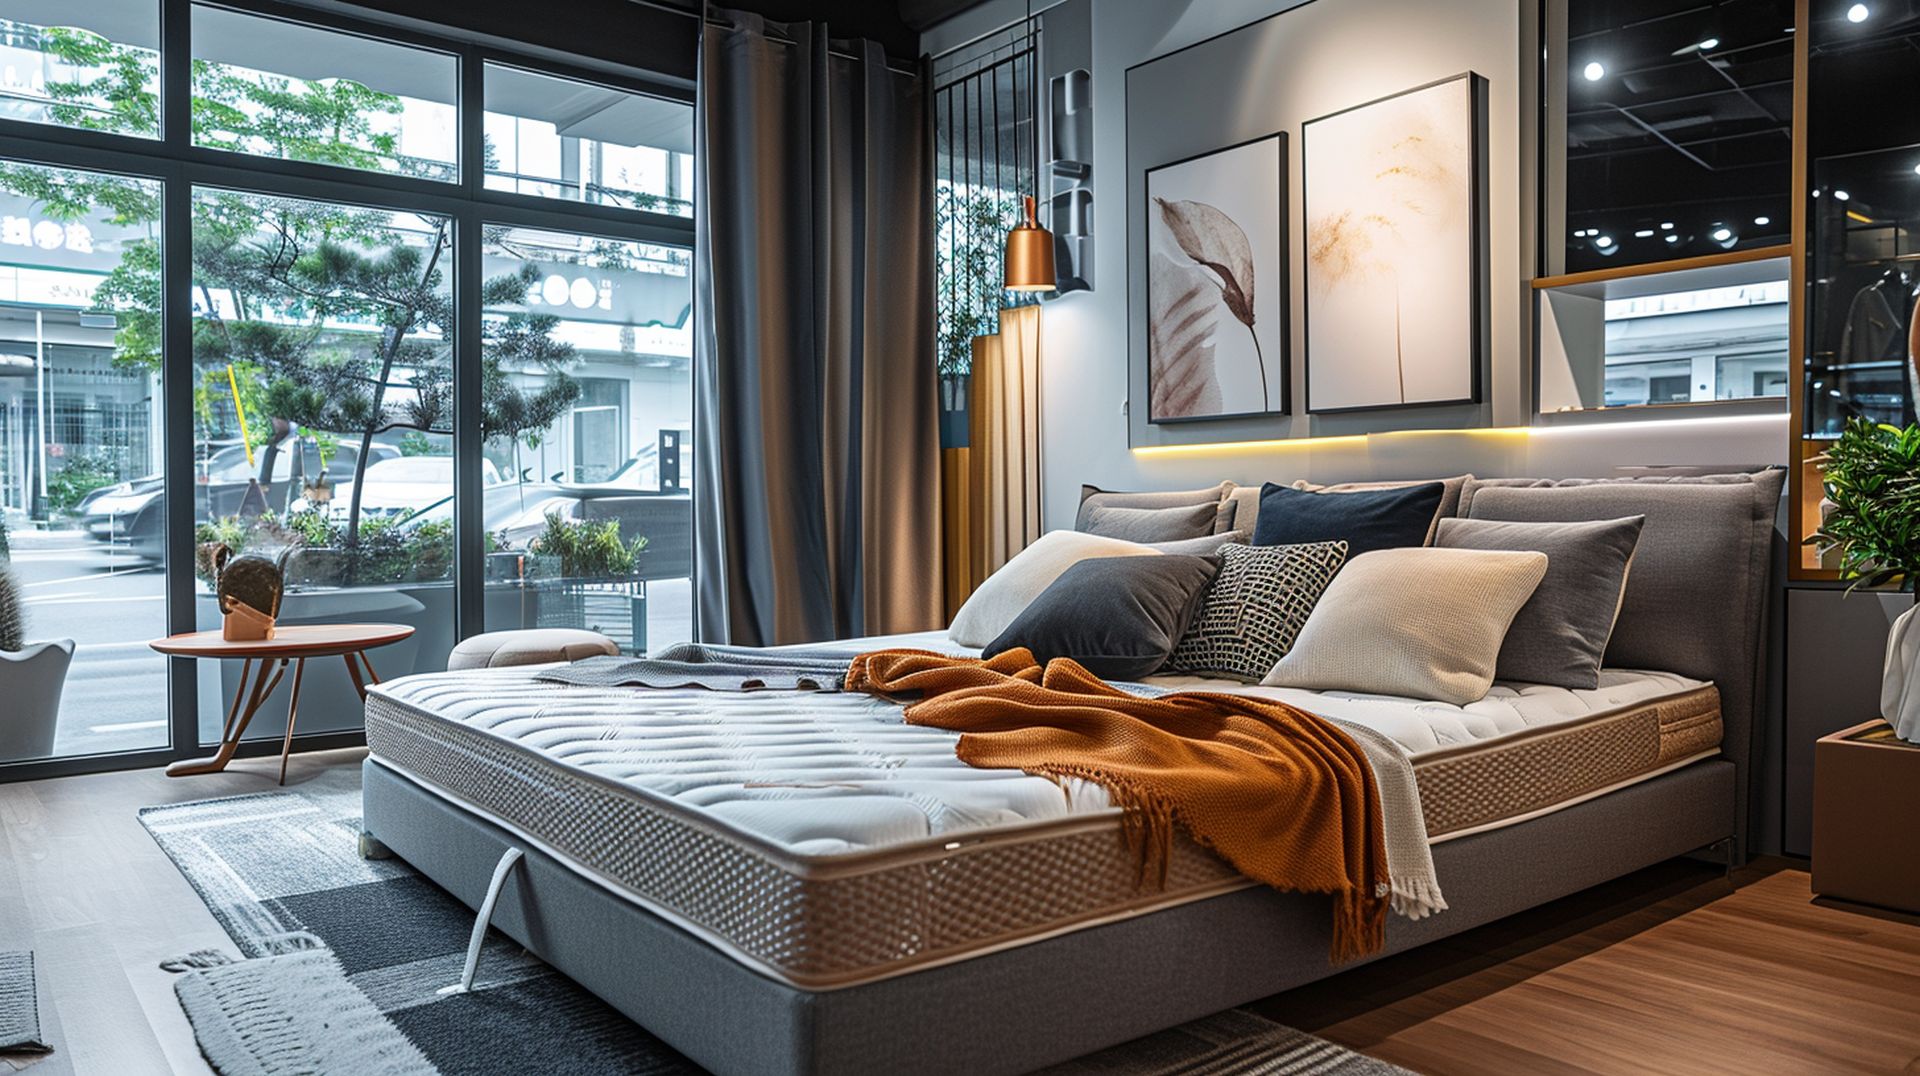 If you're looking for a new bed, mattress stores in Apple Valley offer the best customer and delivery service, financing, and warranties in California